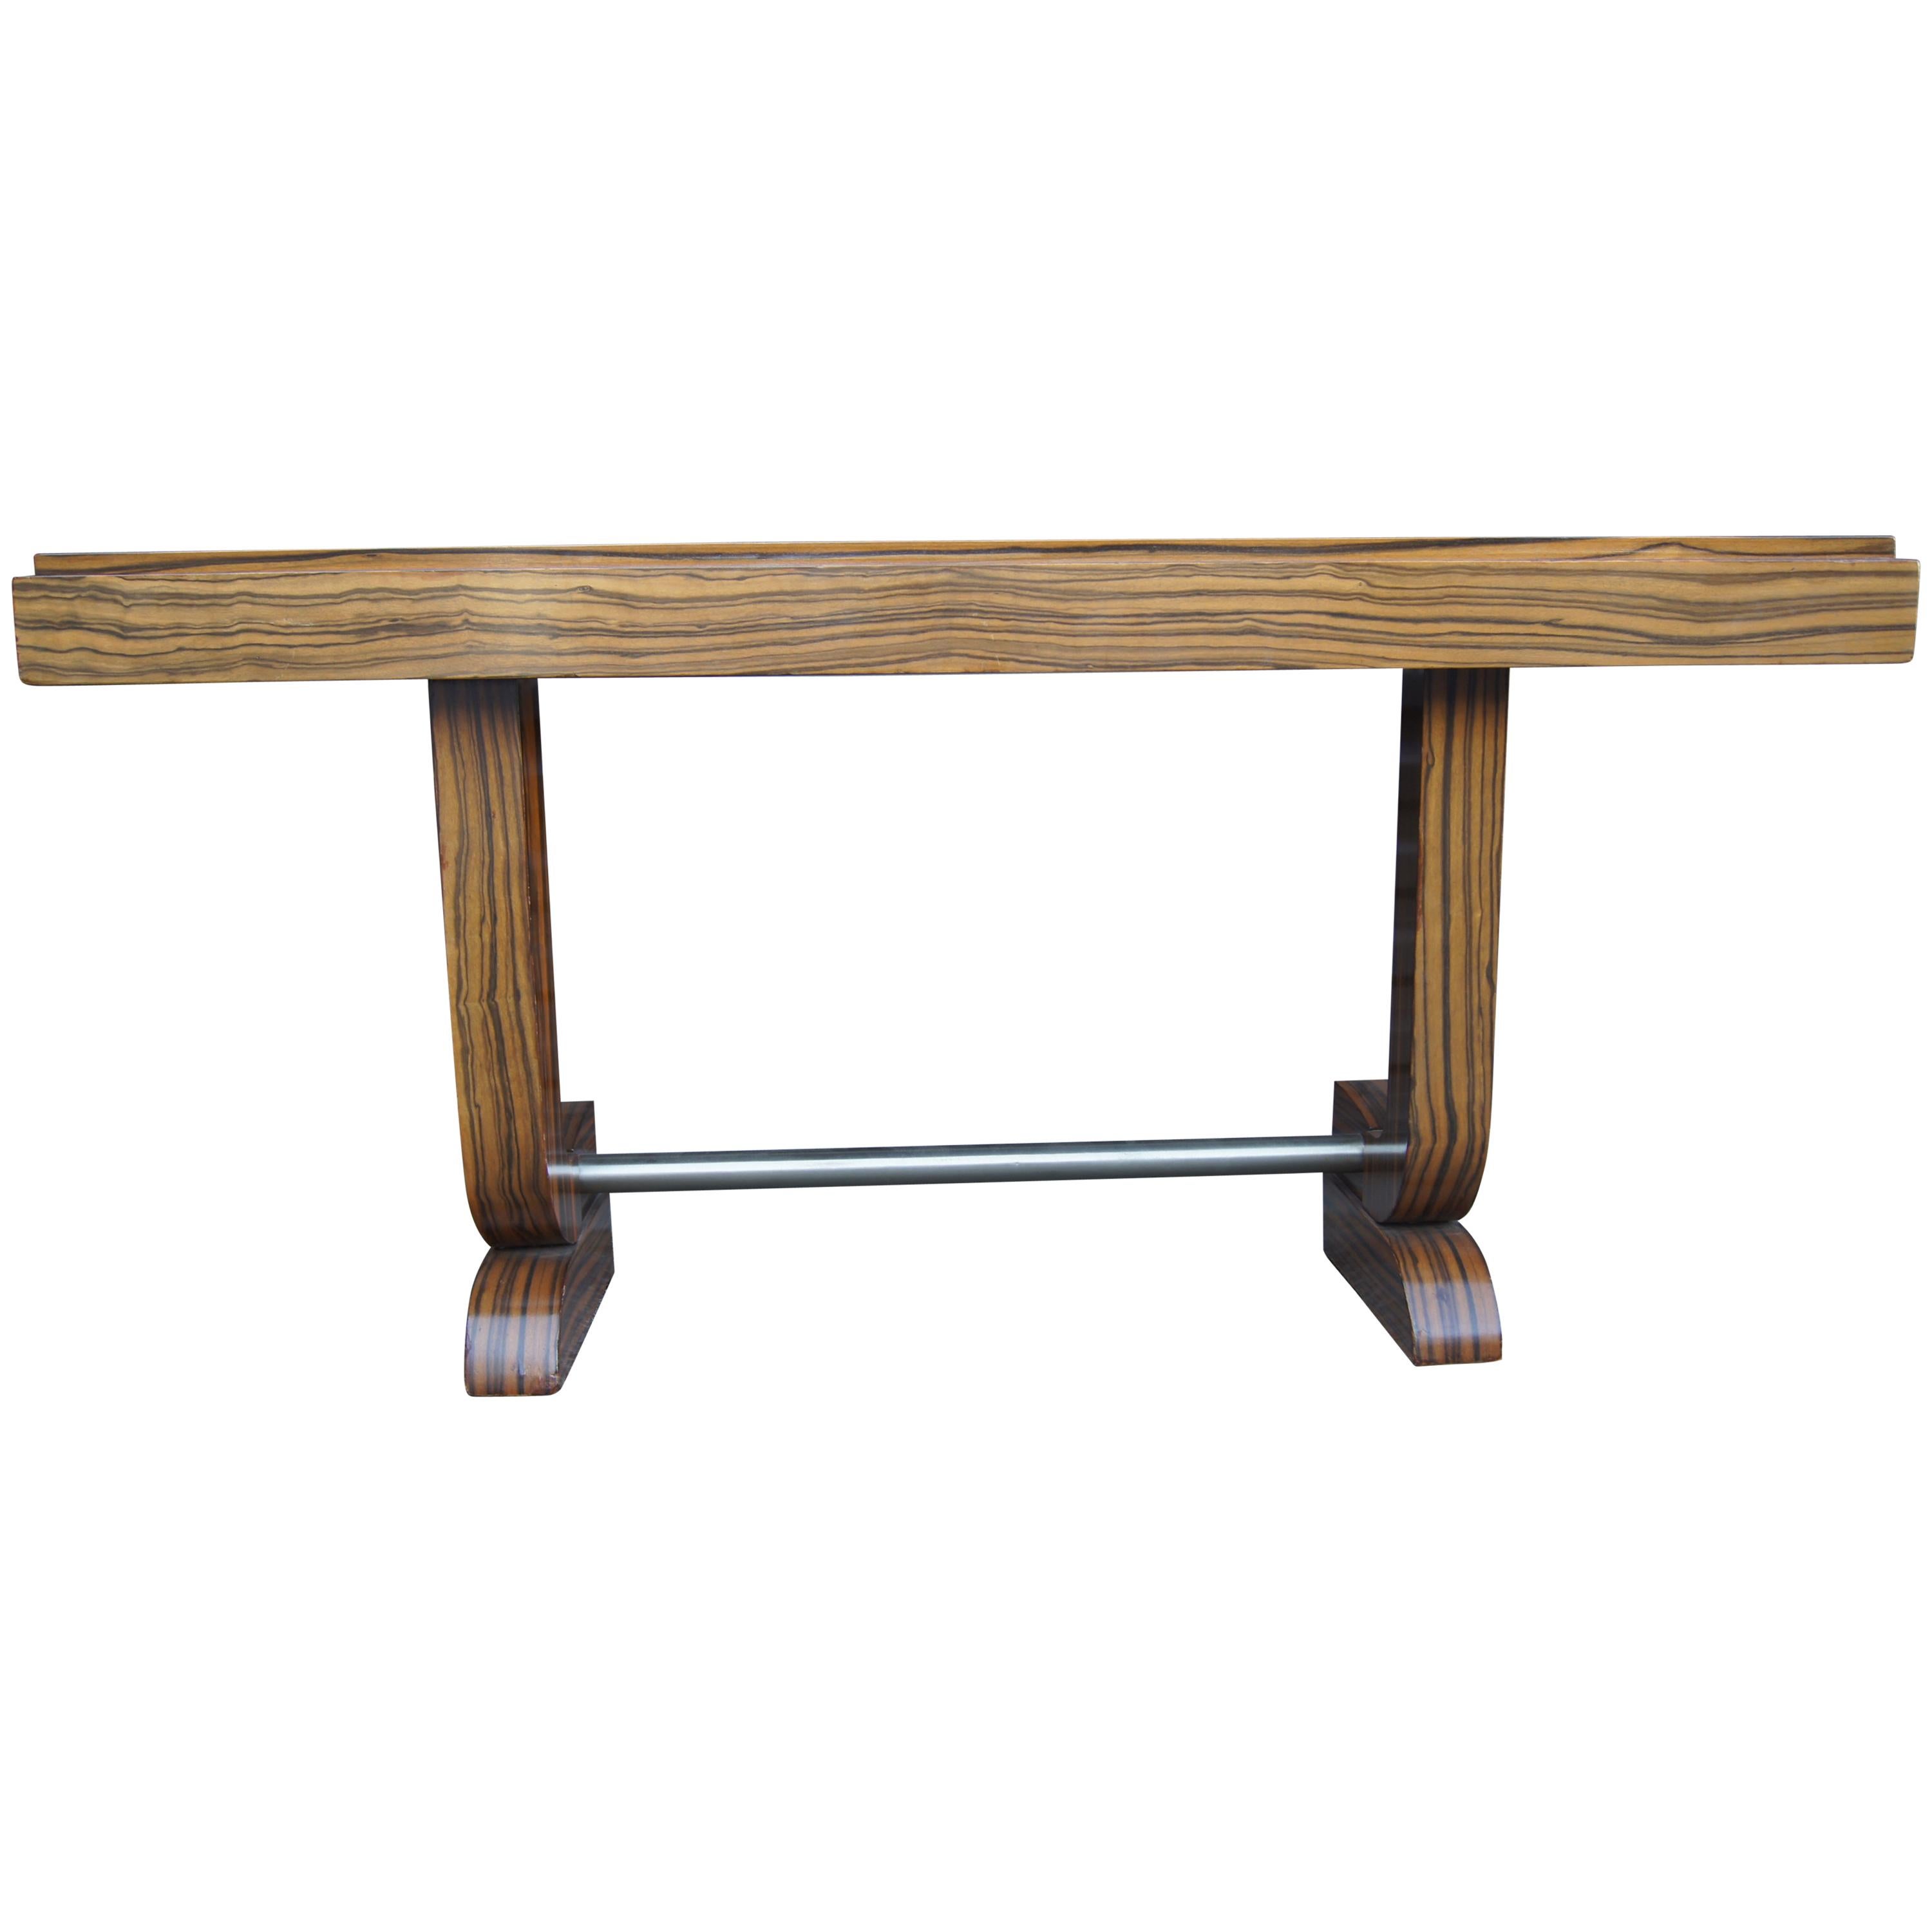 Art Deco–Style Zebrawood Console Table